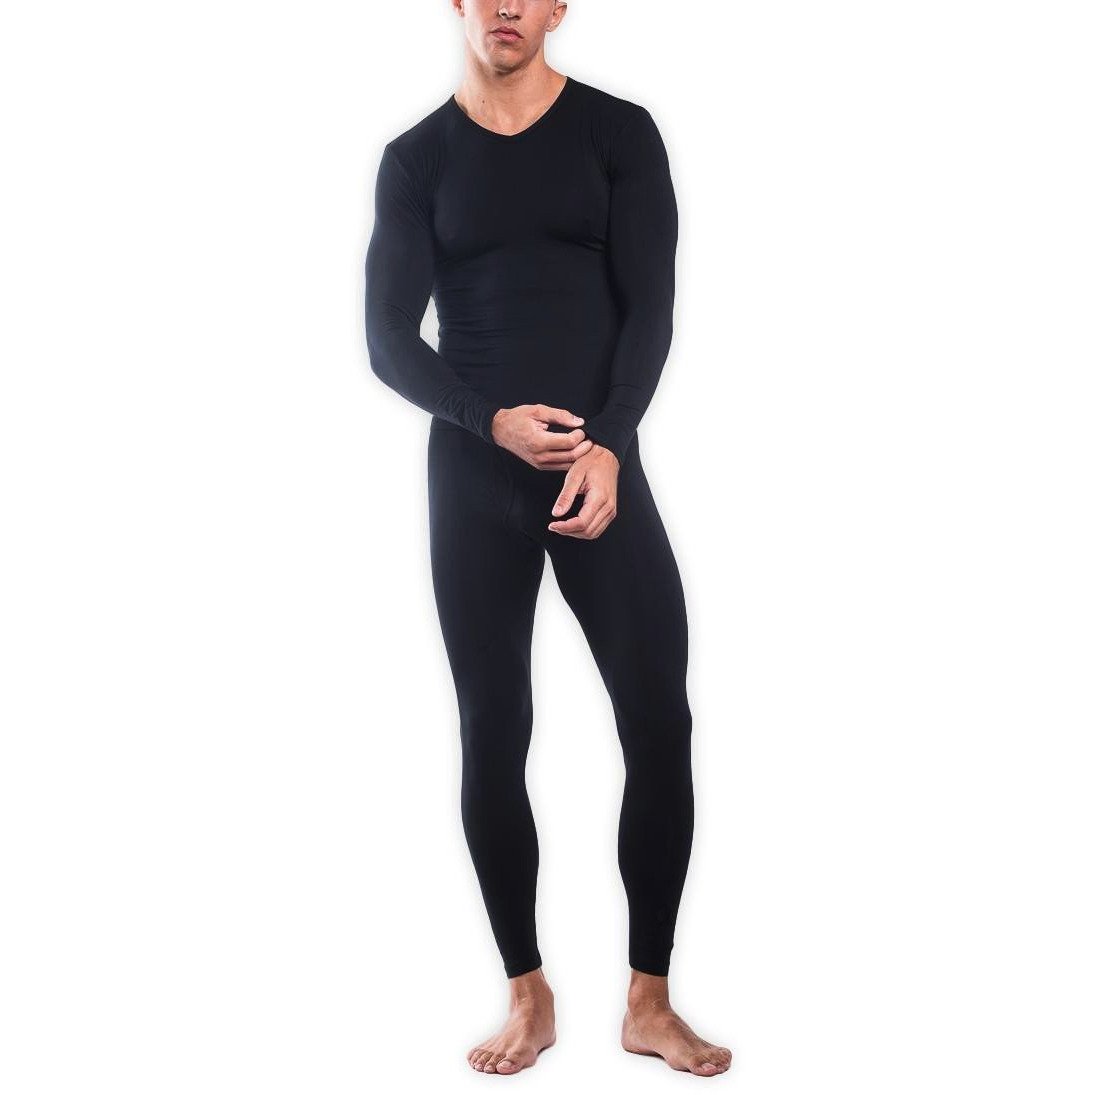 13 of the Best Thermal Underwear